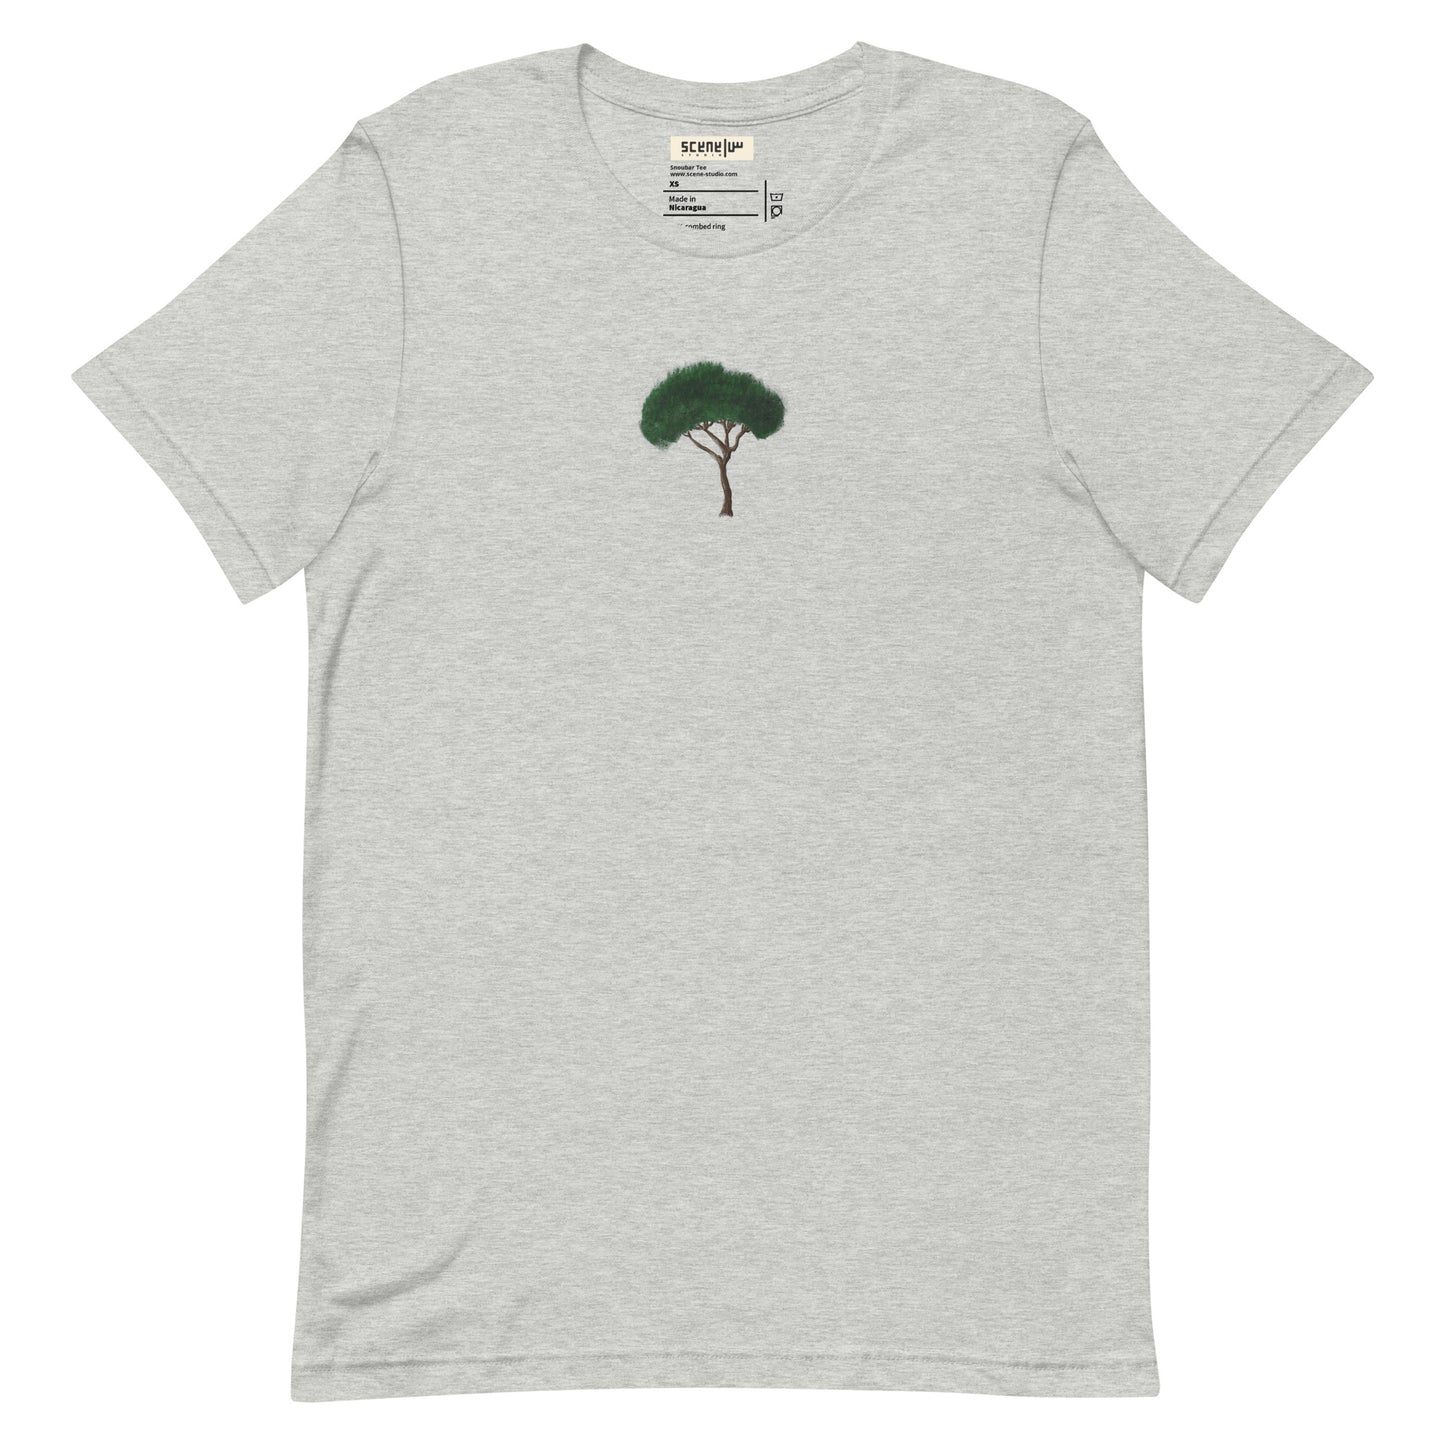 Snoubar Embroidered Unisex t-shirt with Pine tree embroidery in the middle front